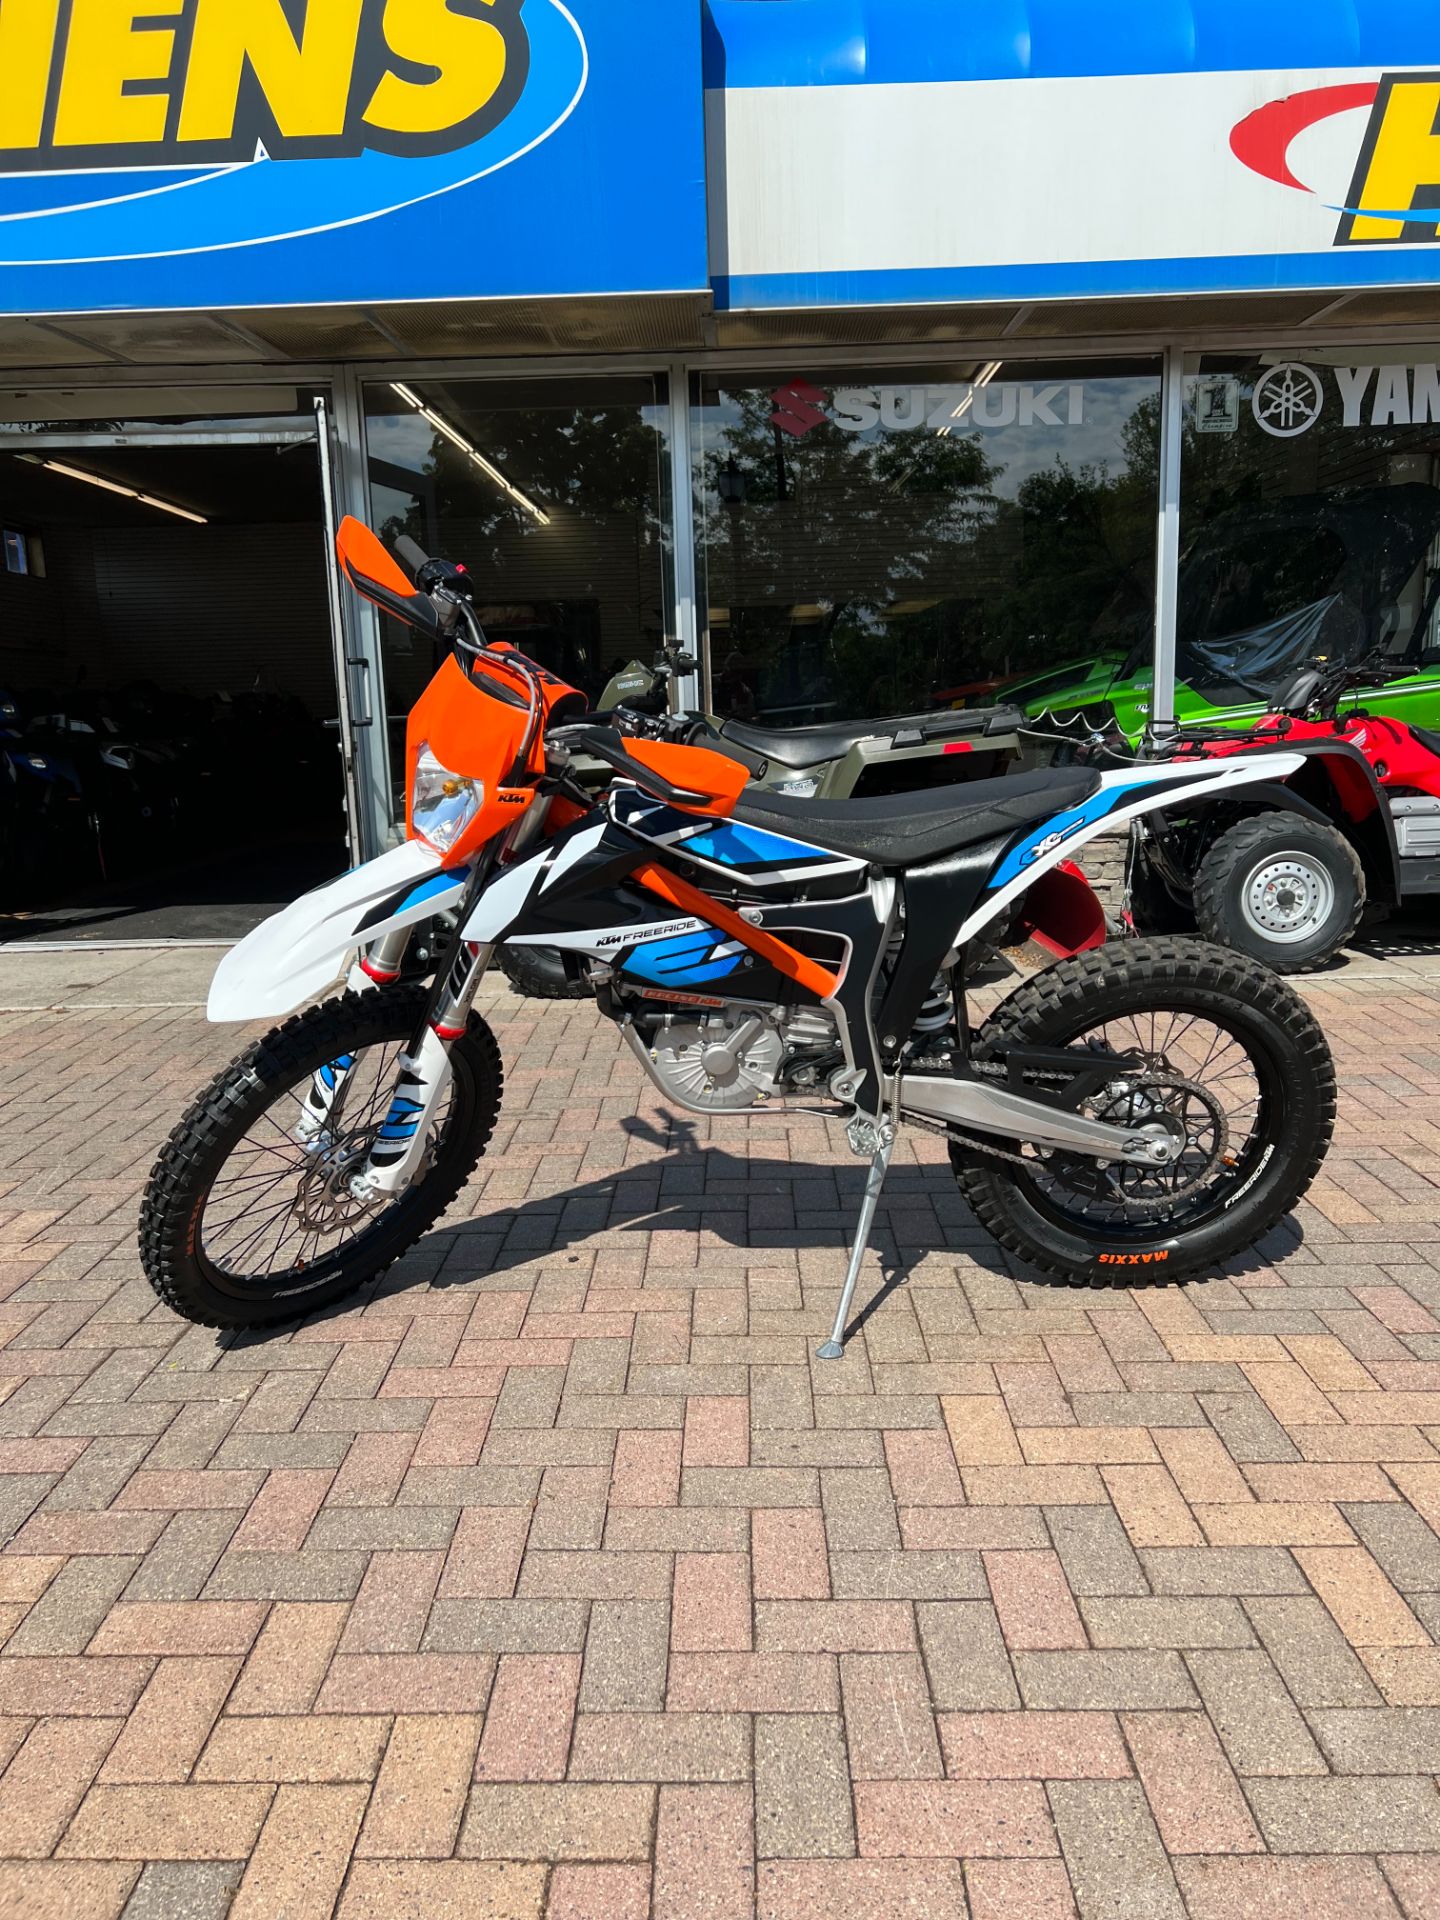 Used 2022 KTM Freeride EXC Motorcycles in Osseo MN 6278 White